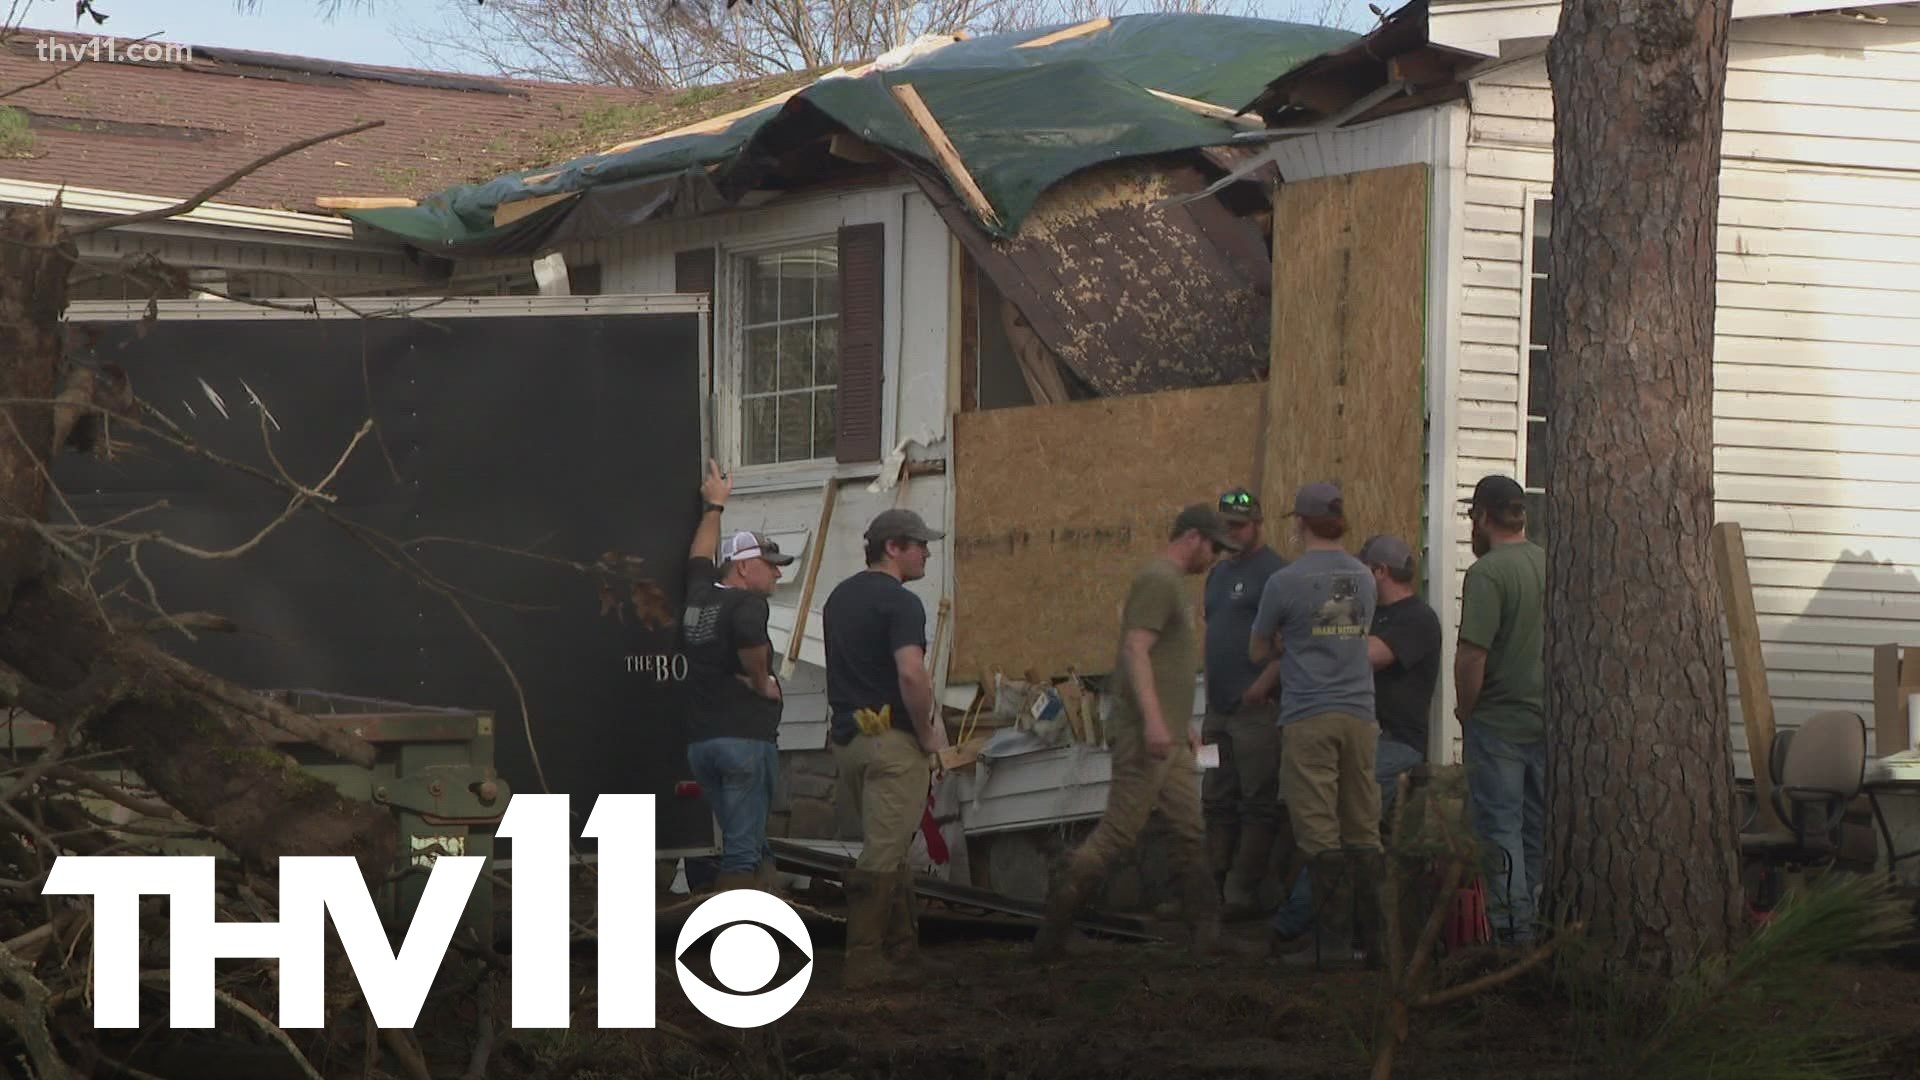 The community of Jessieville is coming together to clean up the damage left by an EF-1 tornado.